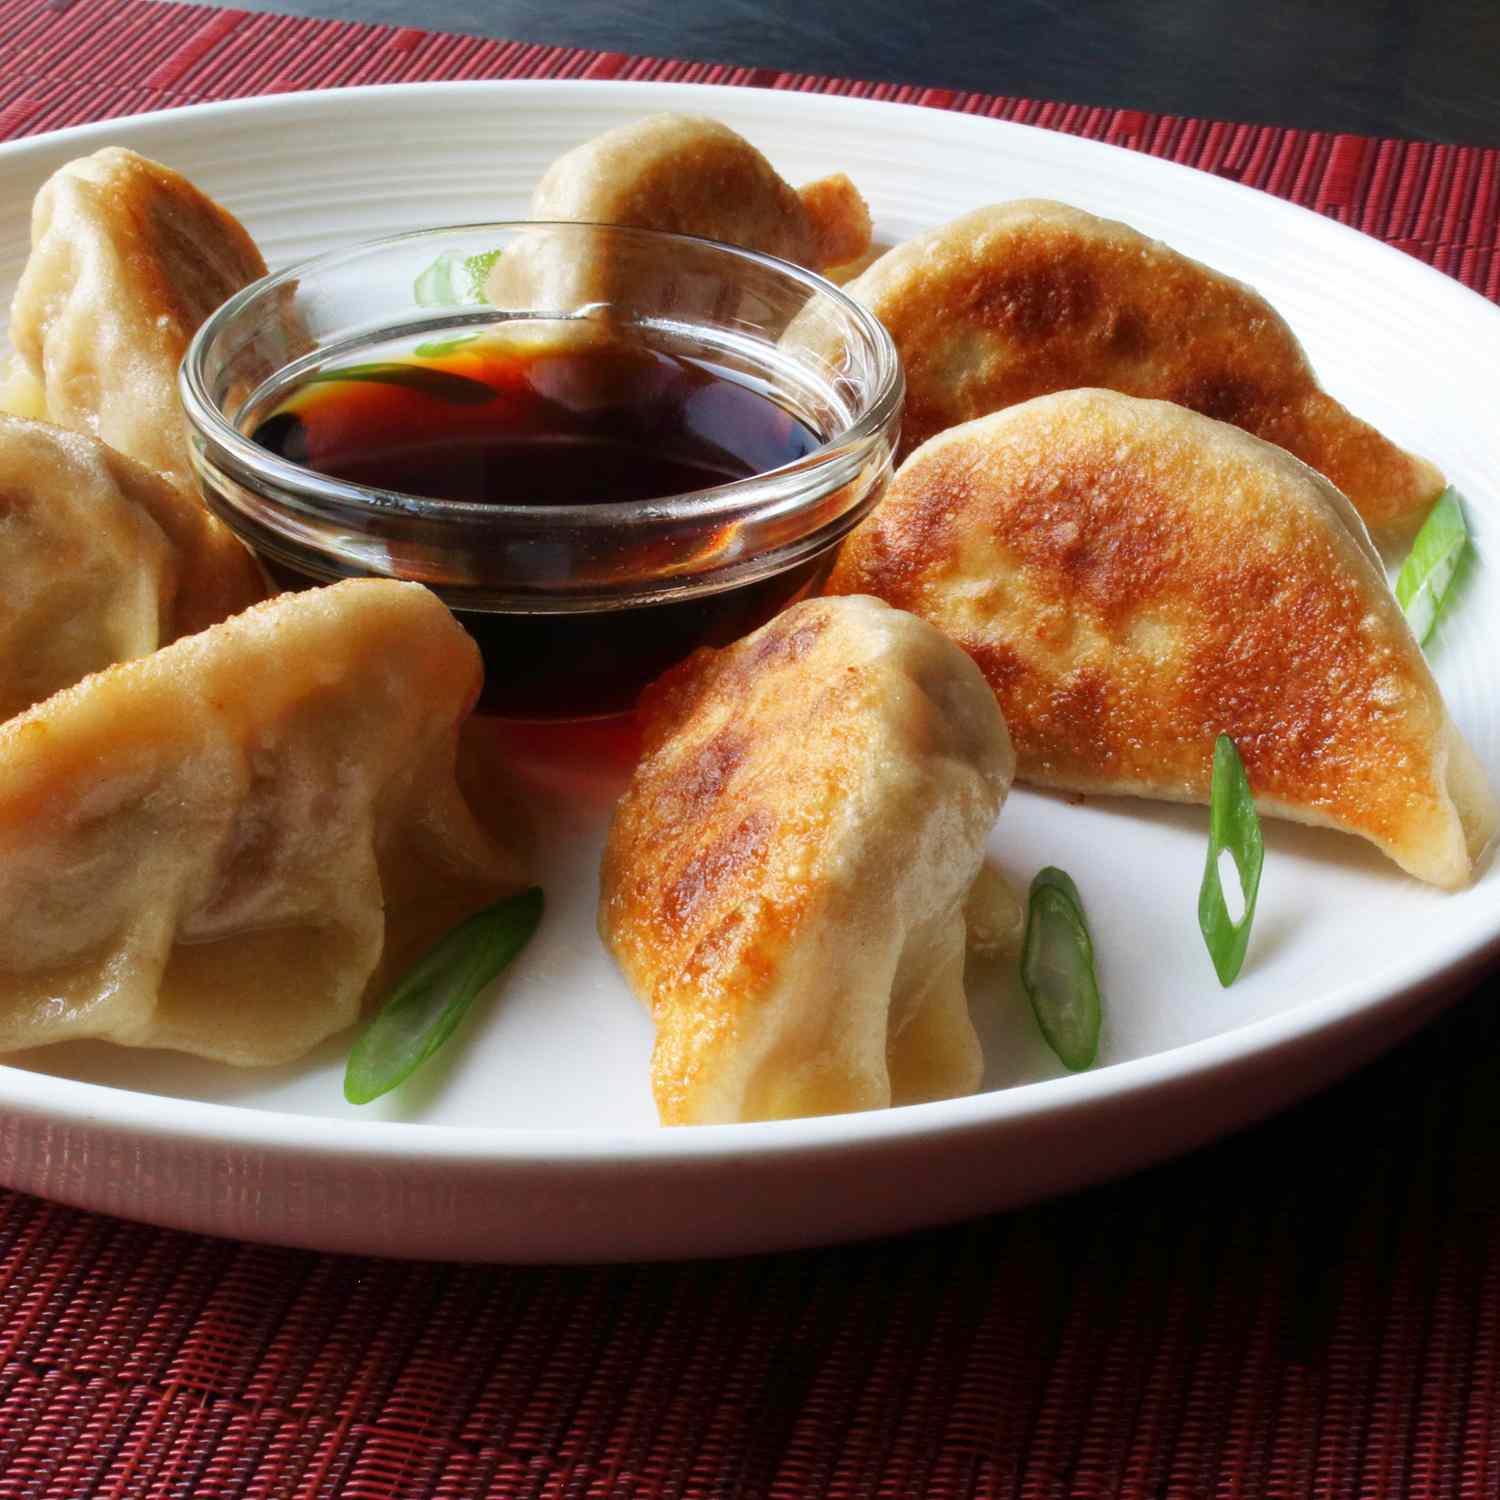 close up view of Pot Stickers on a plate with sauce in a small bowl